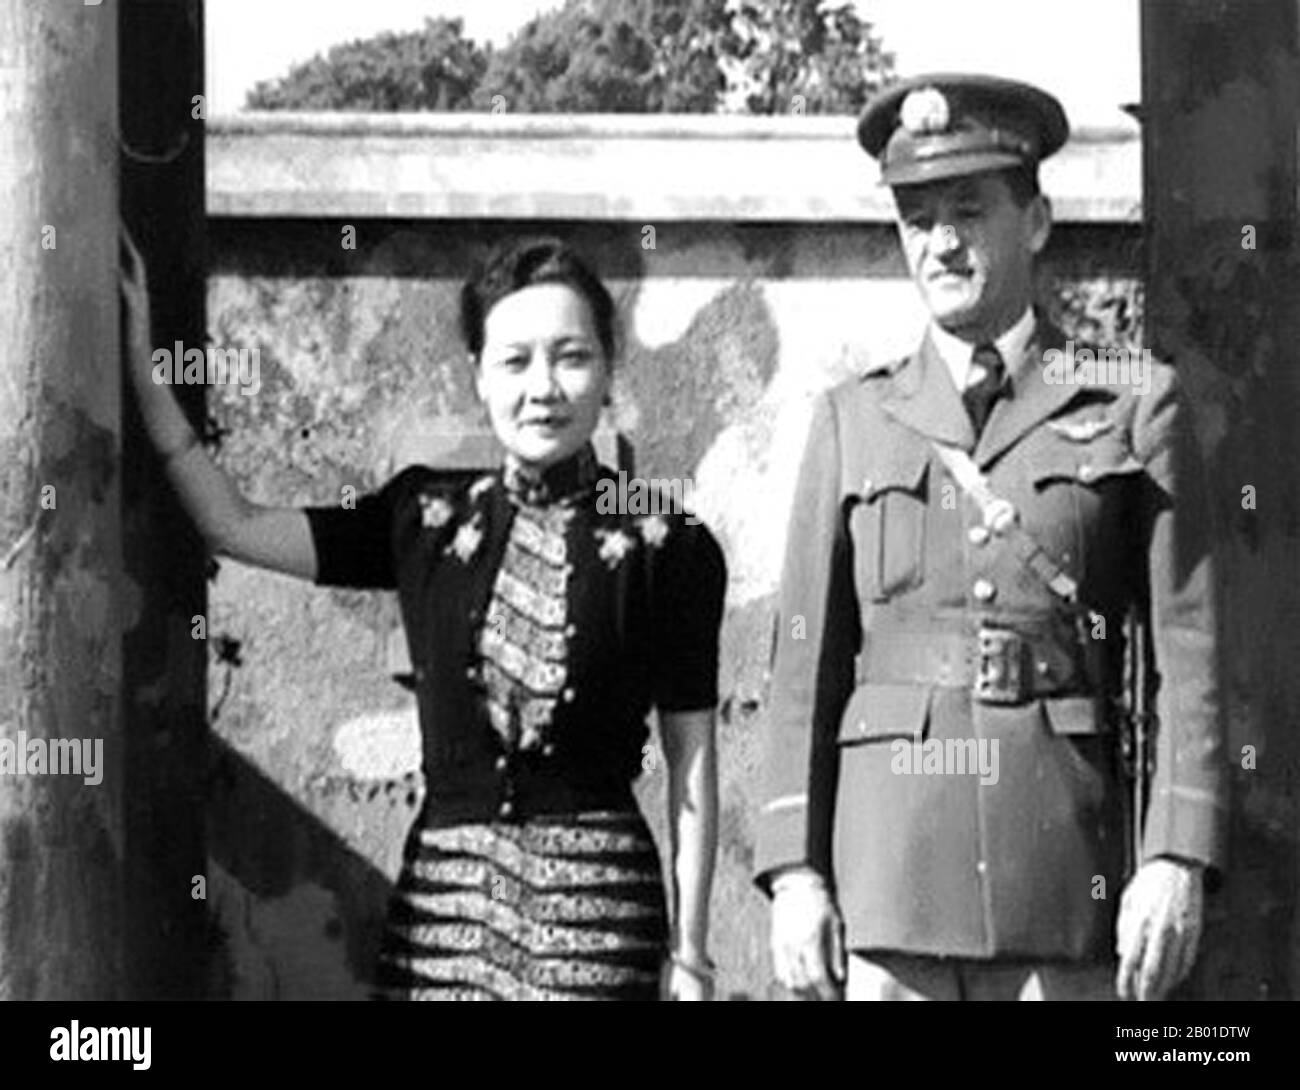 China: General Claire Chennault (6 September 1893 - 27 July 1958), founder of the Flying Tigers, with Soong May Ling (5 March 1898 - 23 October 2003), aka Madame Chiang Kai Shek, Yunnan, c. 1940.  Soong May-ling or Soong Mei-ling, also known as Madame Chiang Kai-shek (traditional Chinese: 宋美齡; simplified Chinese: 宋美龄; pinyin: Sòng Měilíng) was a First Lady of the Republic of China (ROC), the wife of former President Chiang Kai-shek (蔣中正 / 蔣介石).  Lieutenant General Claire Lee Chennault was an American military aviator who worked as an aviation trainer and advisor in China during World War II. Stock Photo